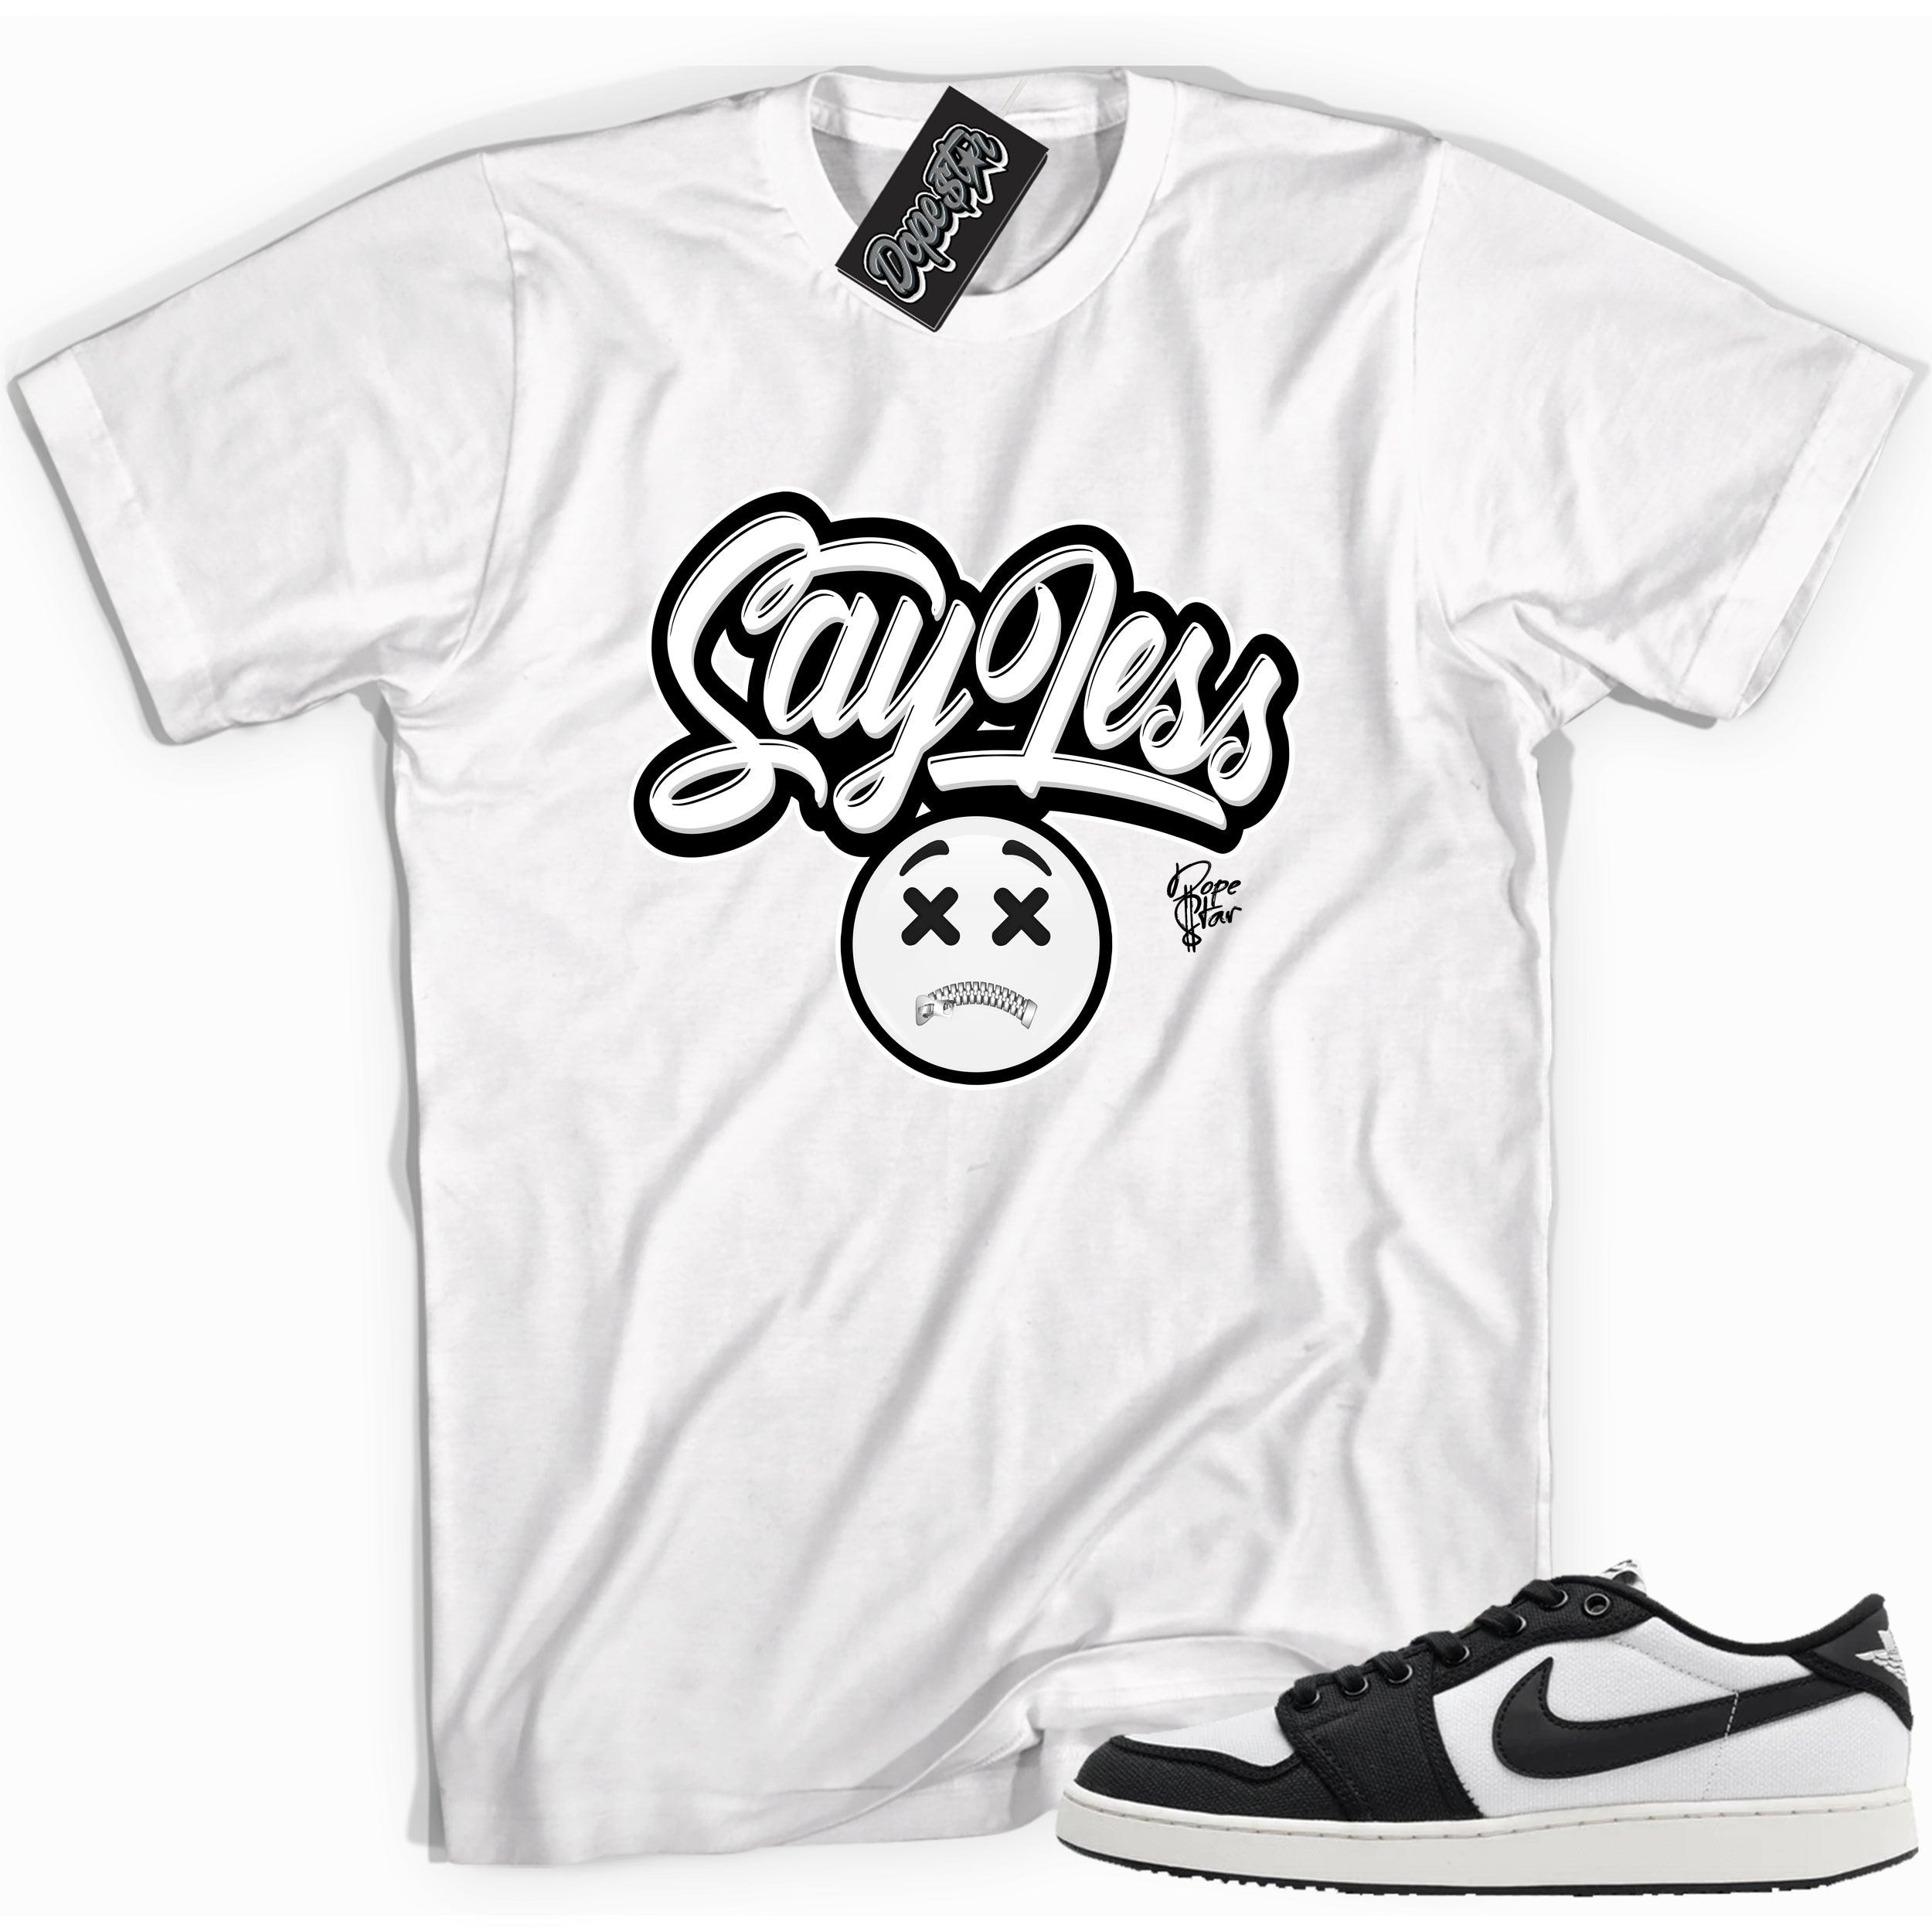 Cool white graphic tee with 'sayless' print, that perfectly matches Air Jordan 1 Retro Ajko Low Black & White sneakers.